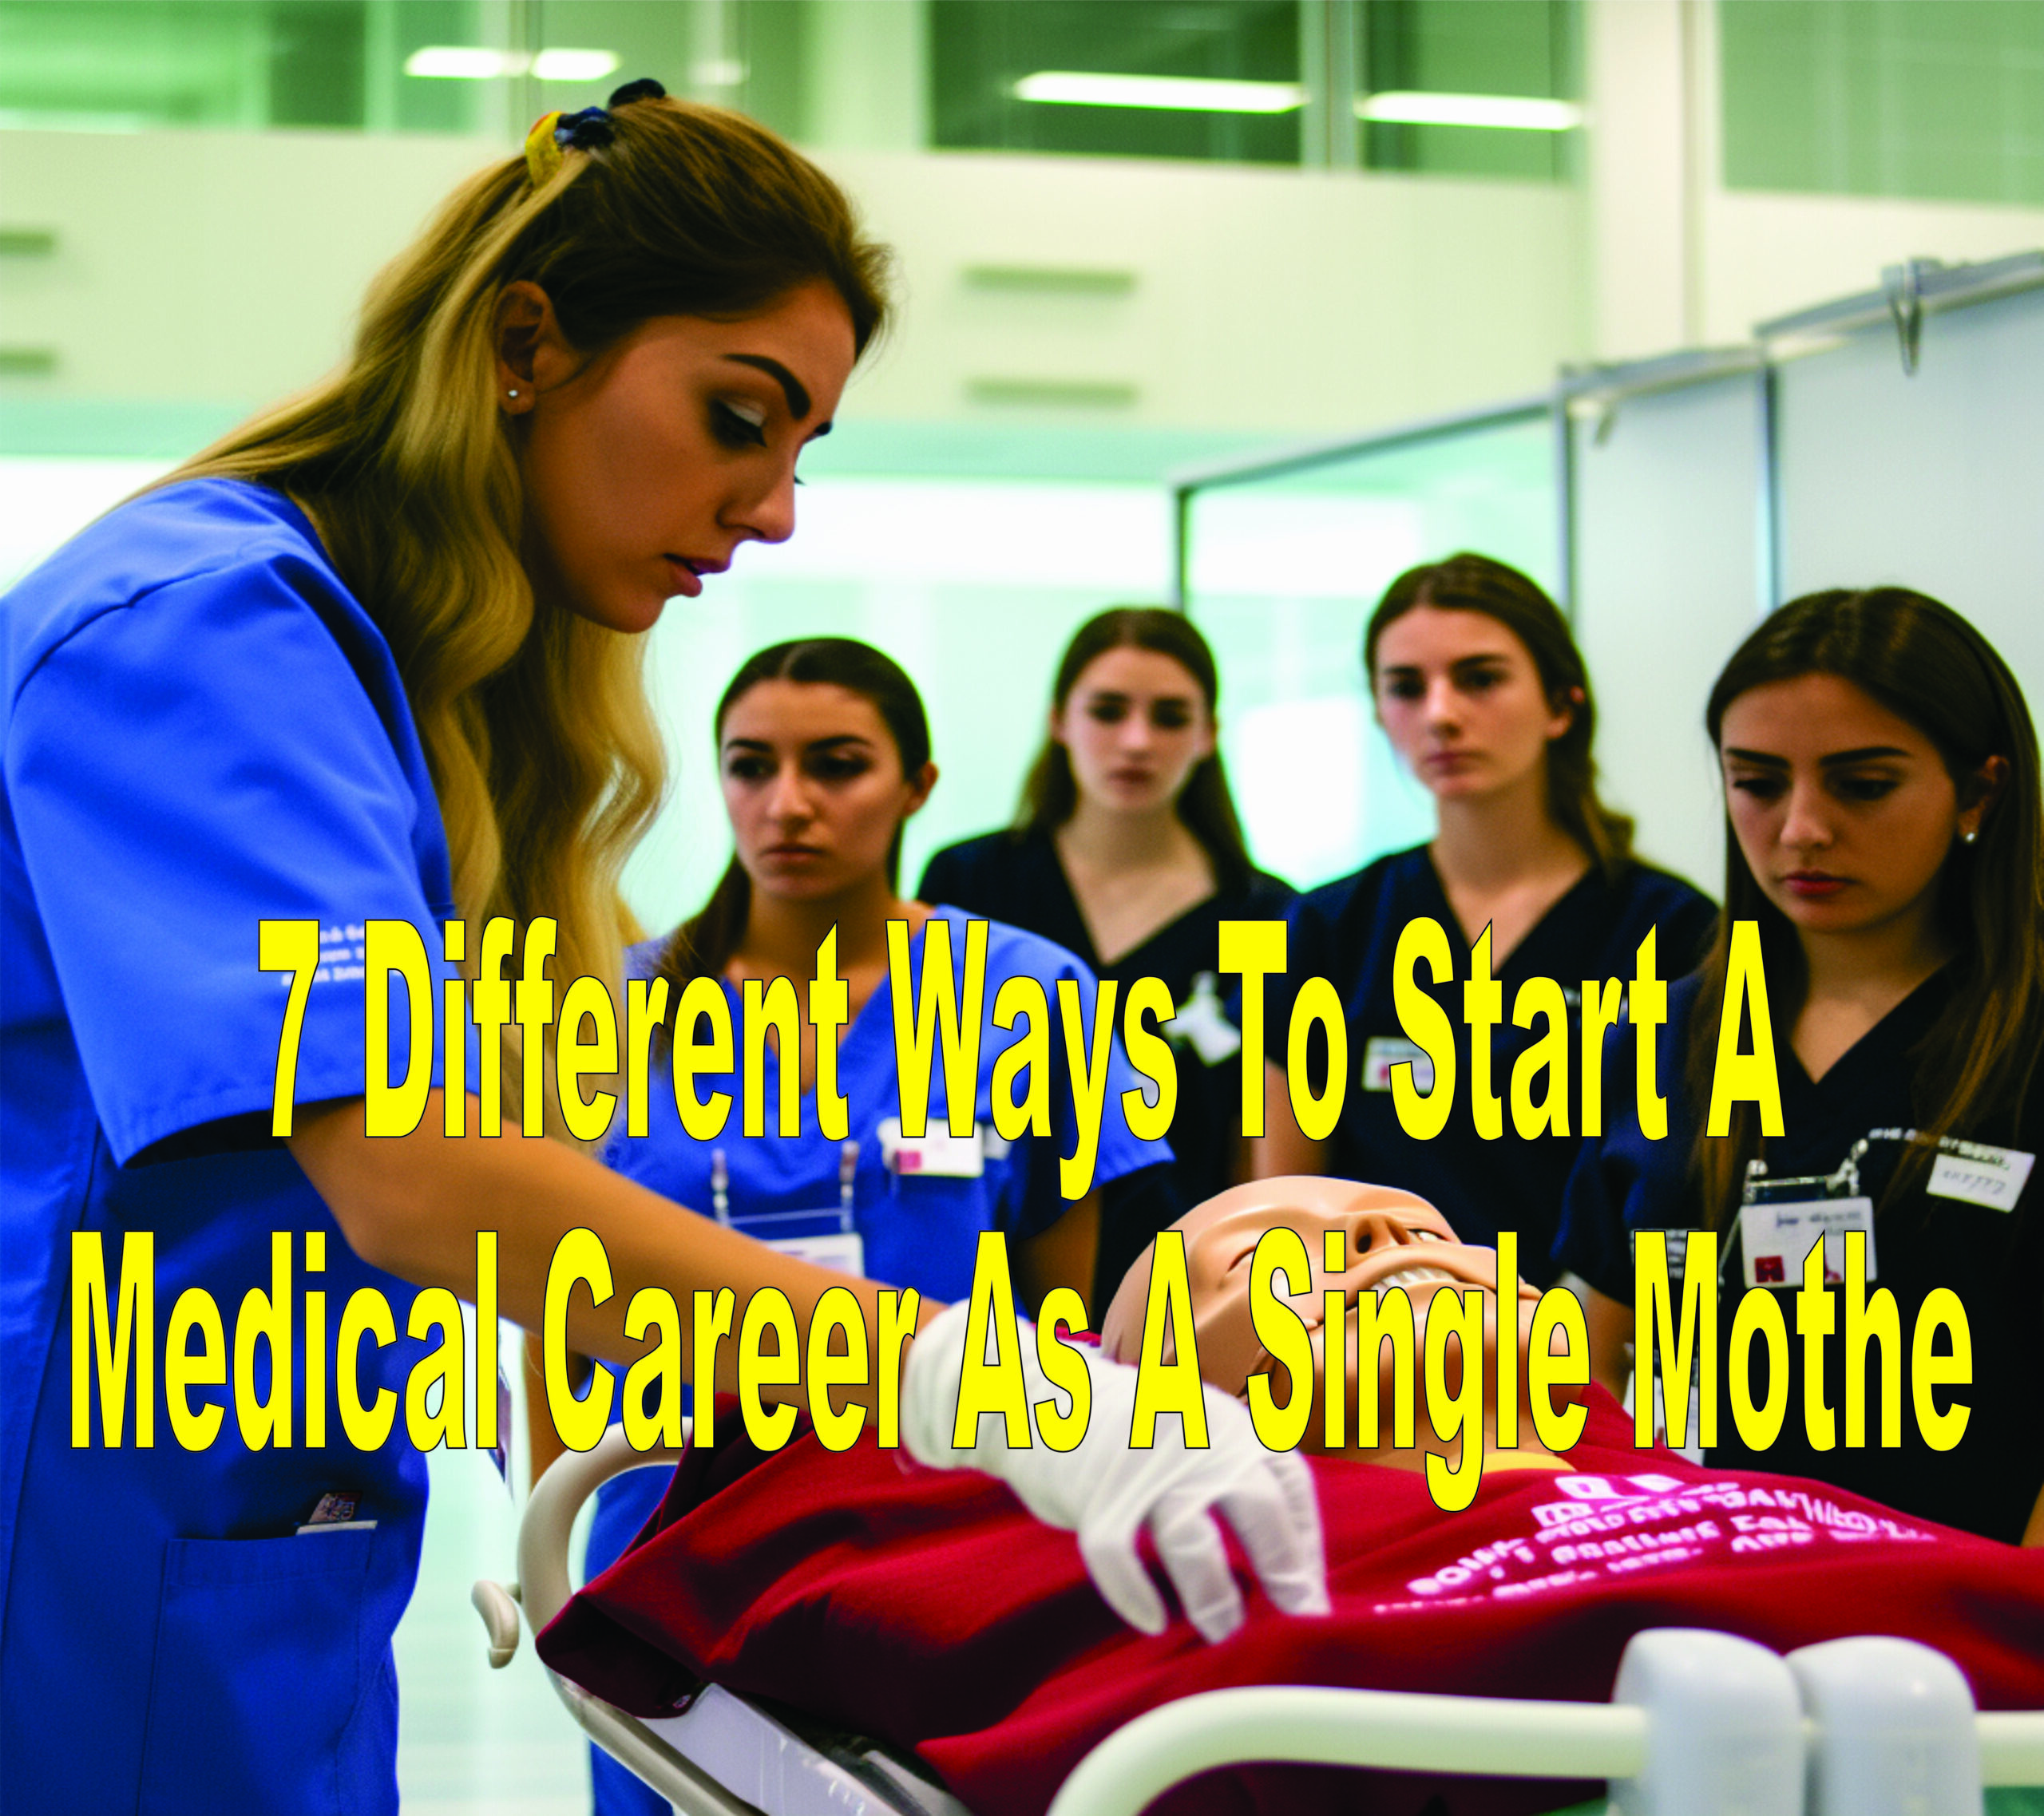 7 Different Ways To Start A Medical Career As A Single Mothe